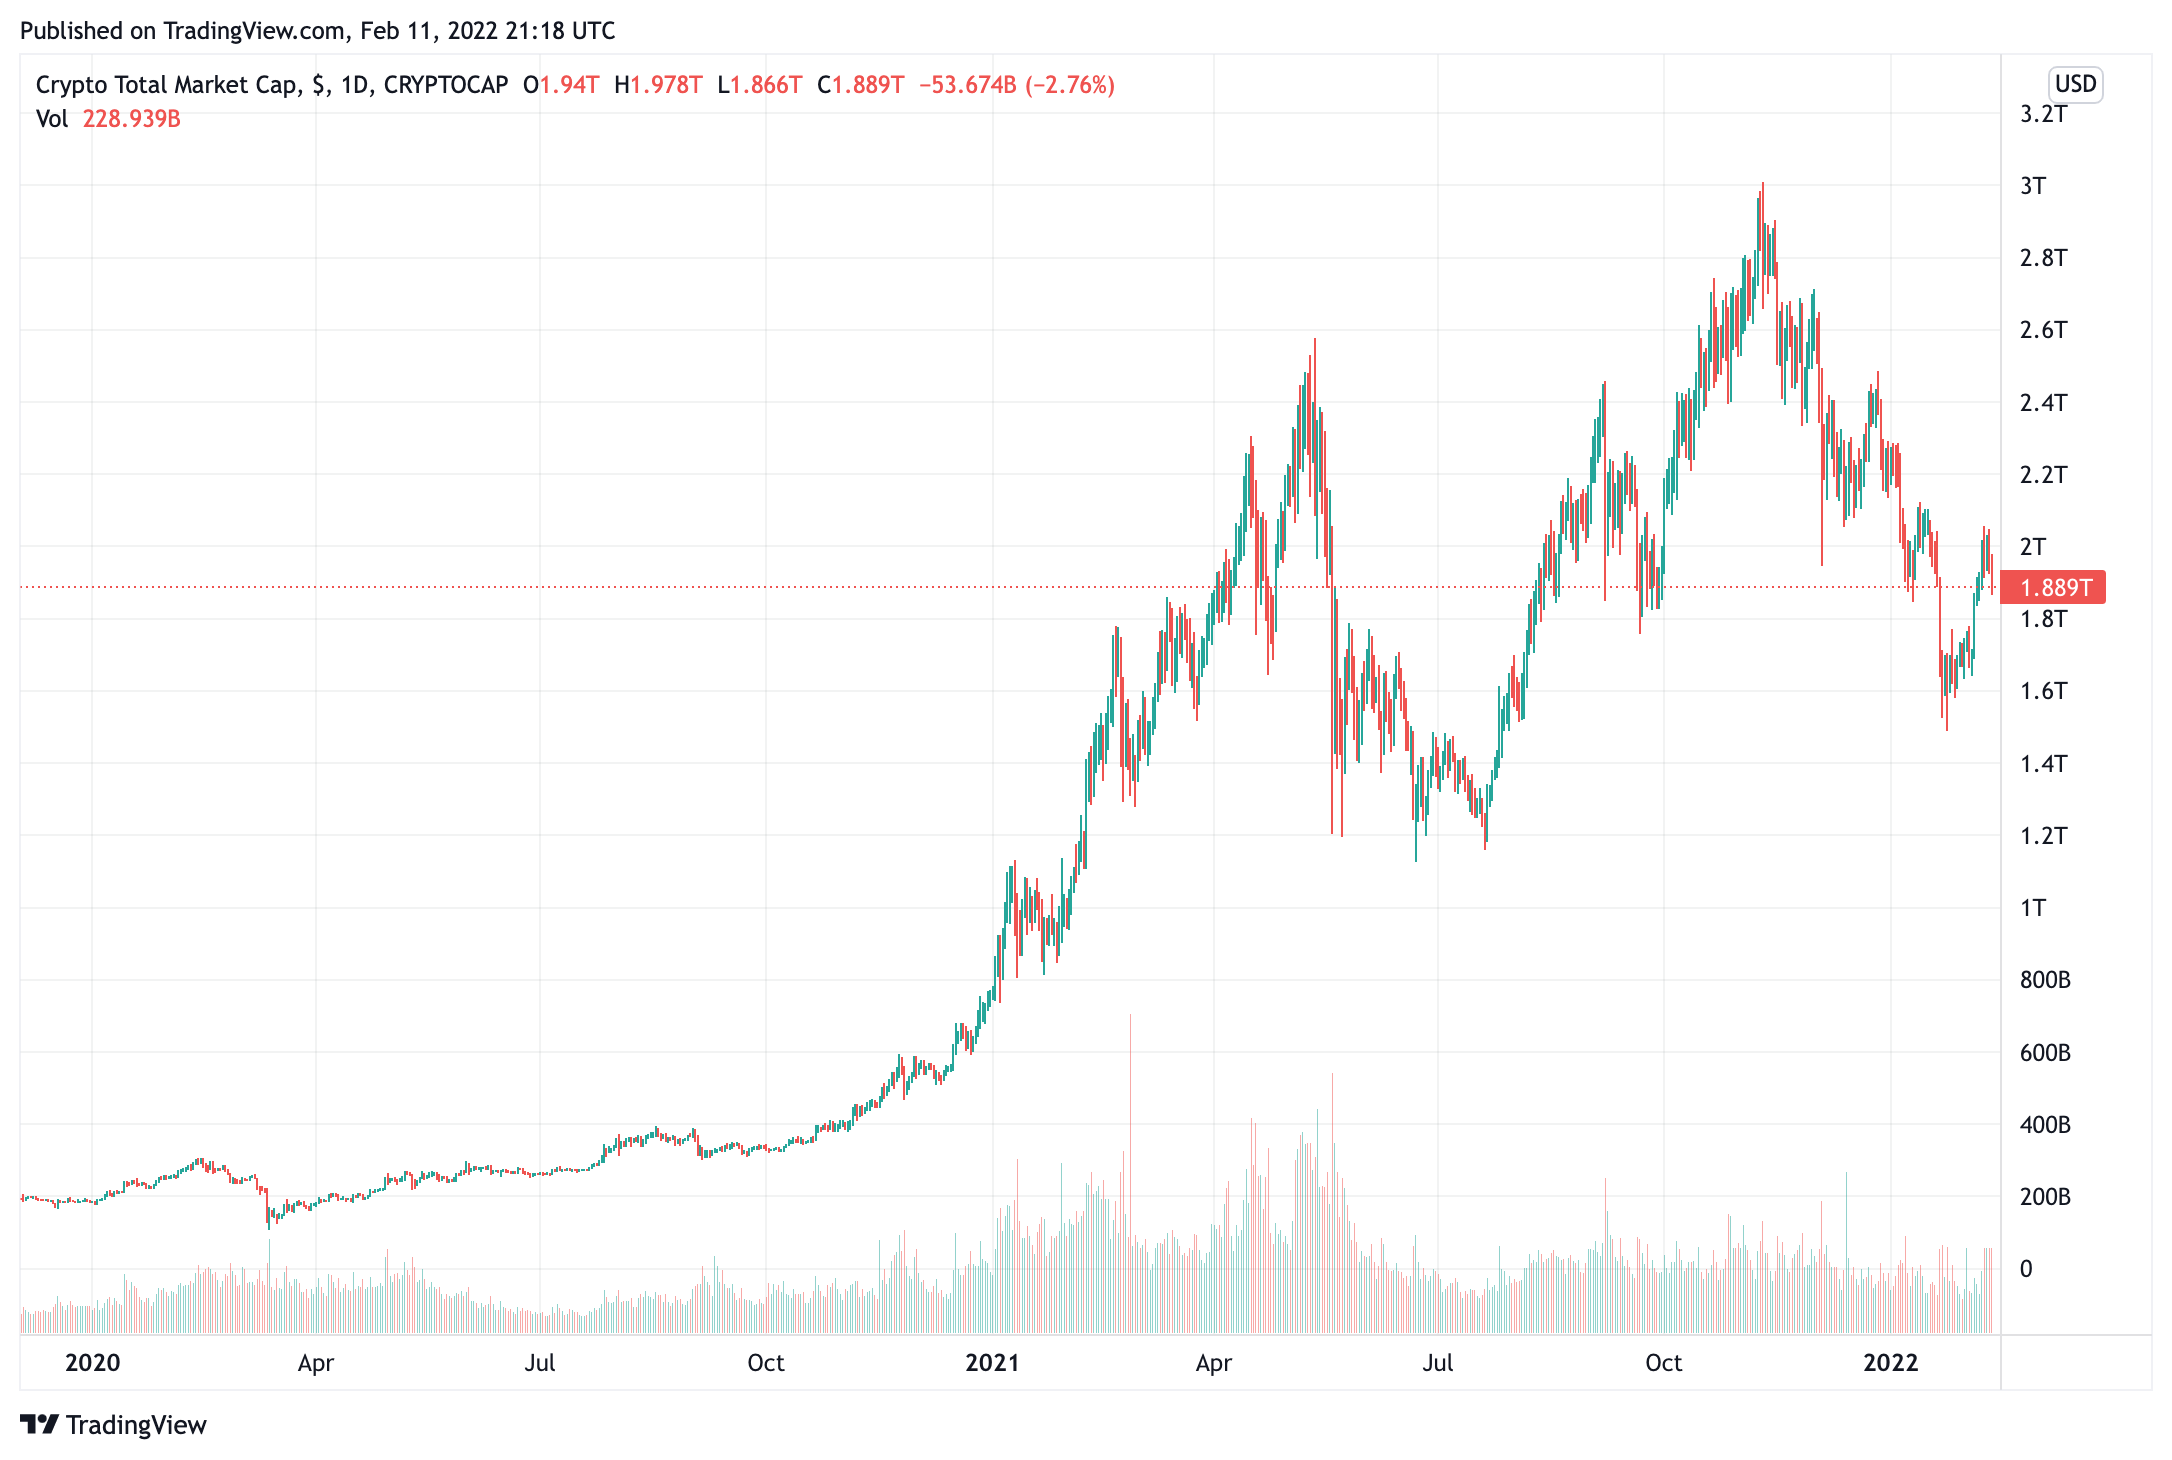 The total cryptocurrency market cap was $1.89 trillion on February 11th, 2022